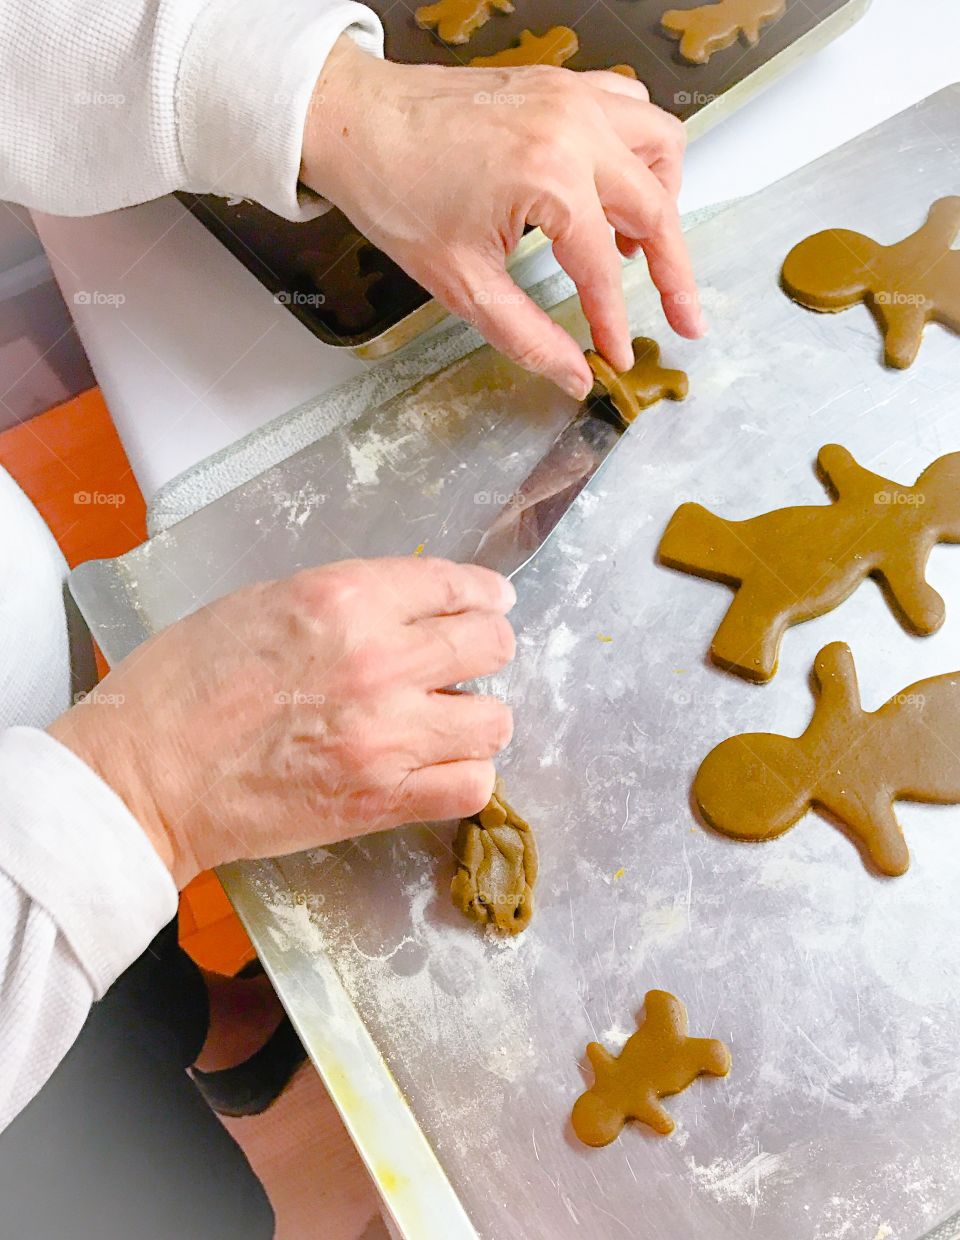 Making gingerbread cookies takes patience, care and practice. Yummy is almost here. 